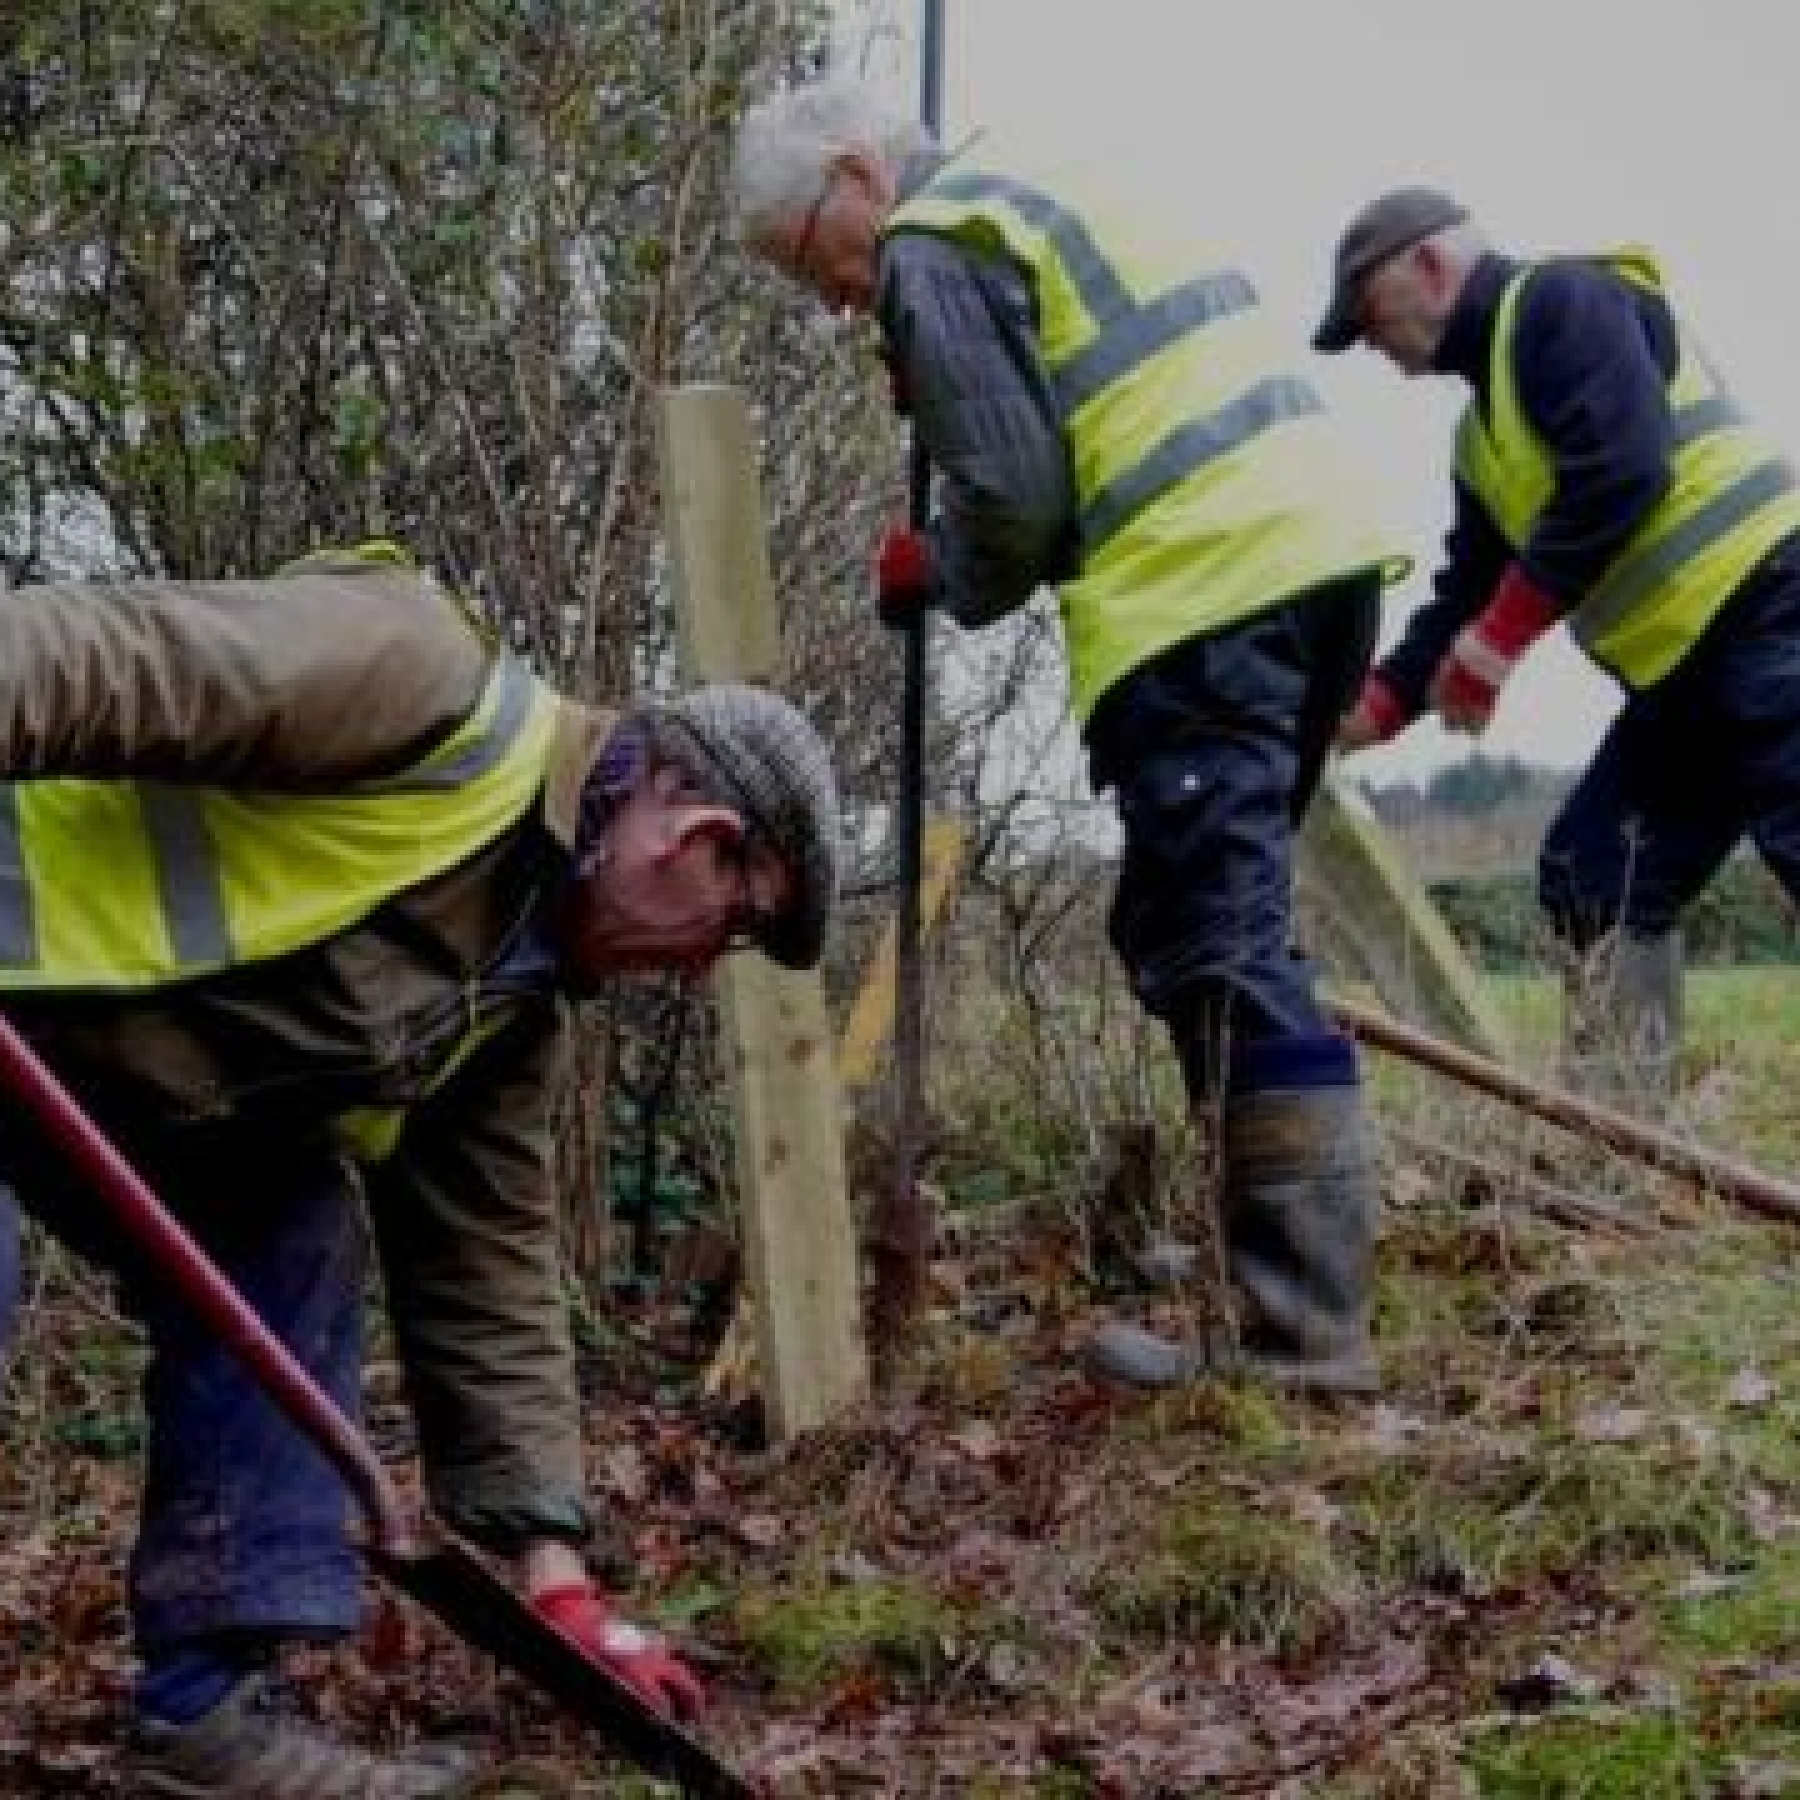 Andrew Stumpf works with other volunteers, and landowners, in Monmouthshire to repair local rights of way